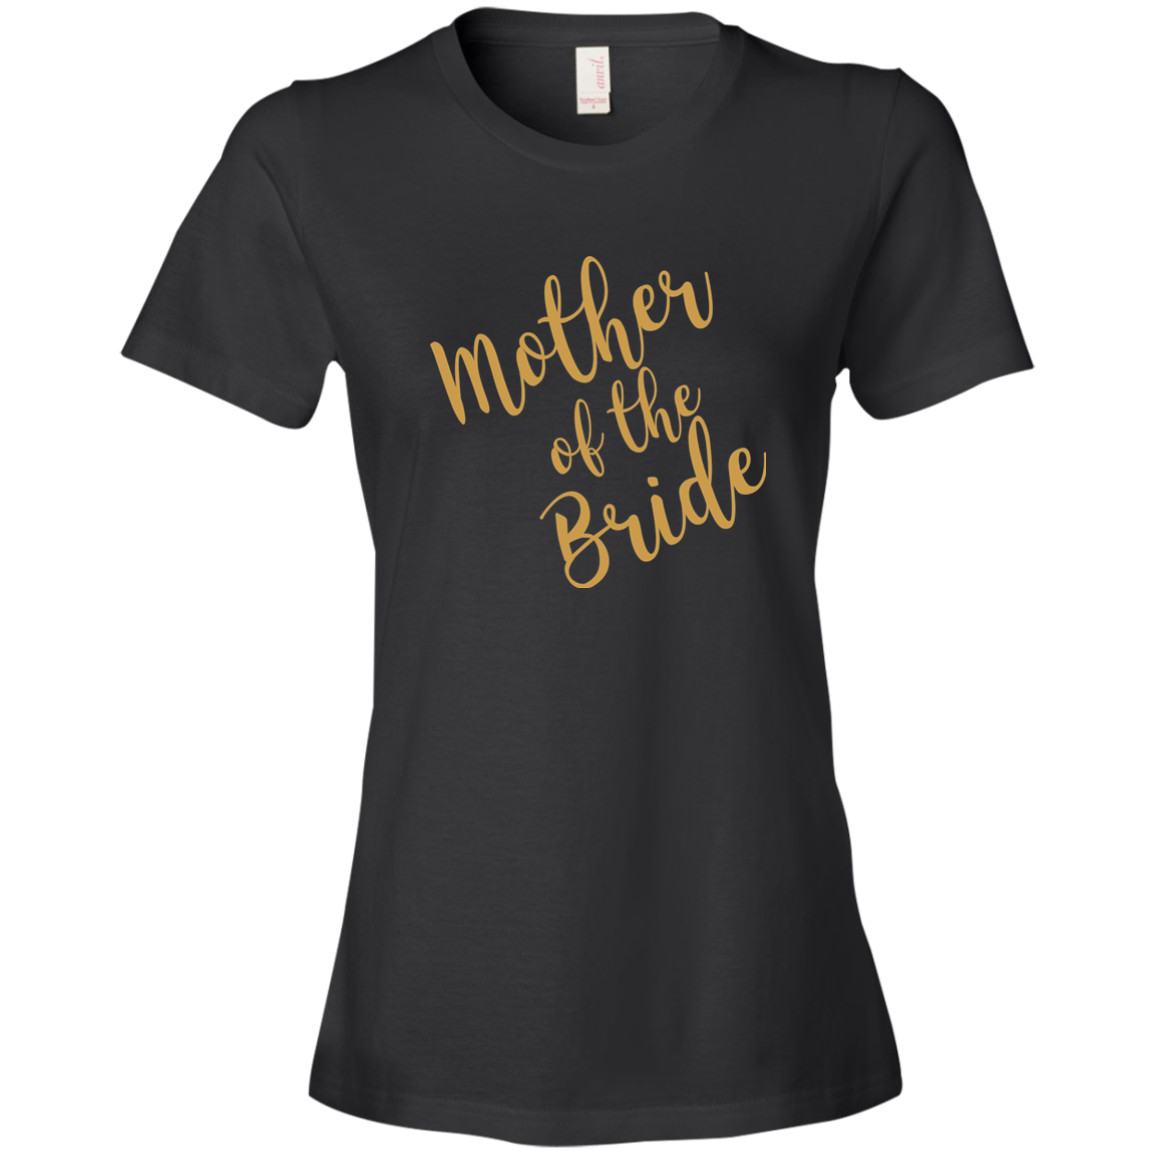 Mother of the Bride T-Shirt